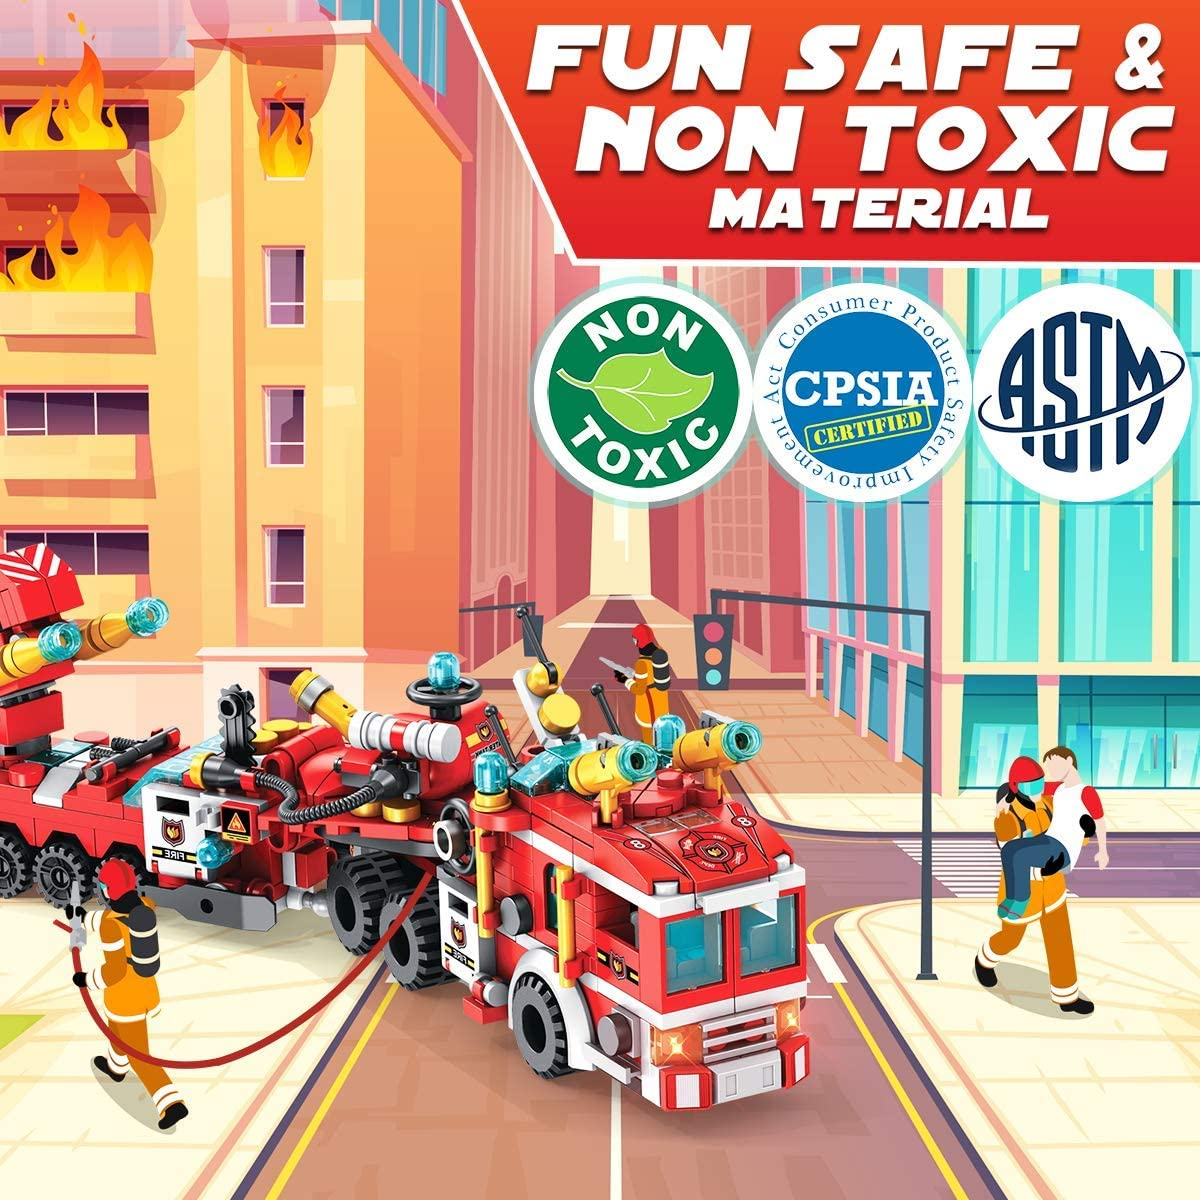 Construction Building Toys for Kids - 25 in 1 Fire Truck Boat Helicopter Car Toy Building Blocks Model Kit Educational STEM Activities Gifts for Boys Girls Teen Age 6 7 8 9 10 11 12 Year Old